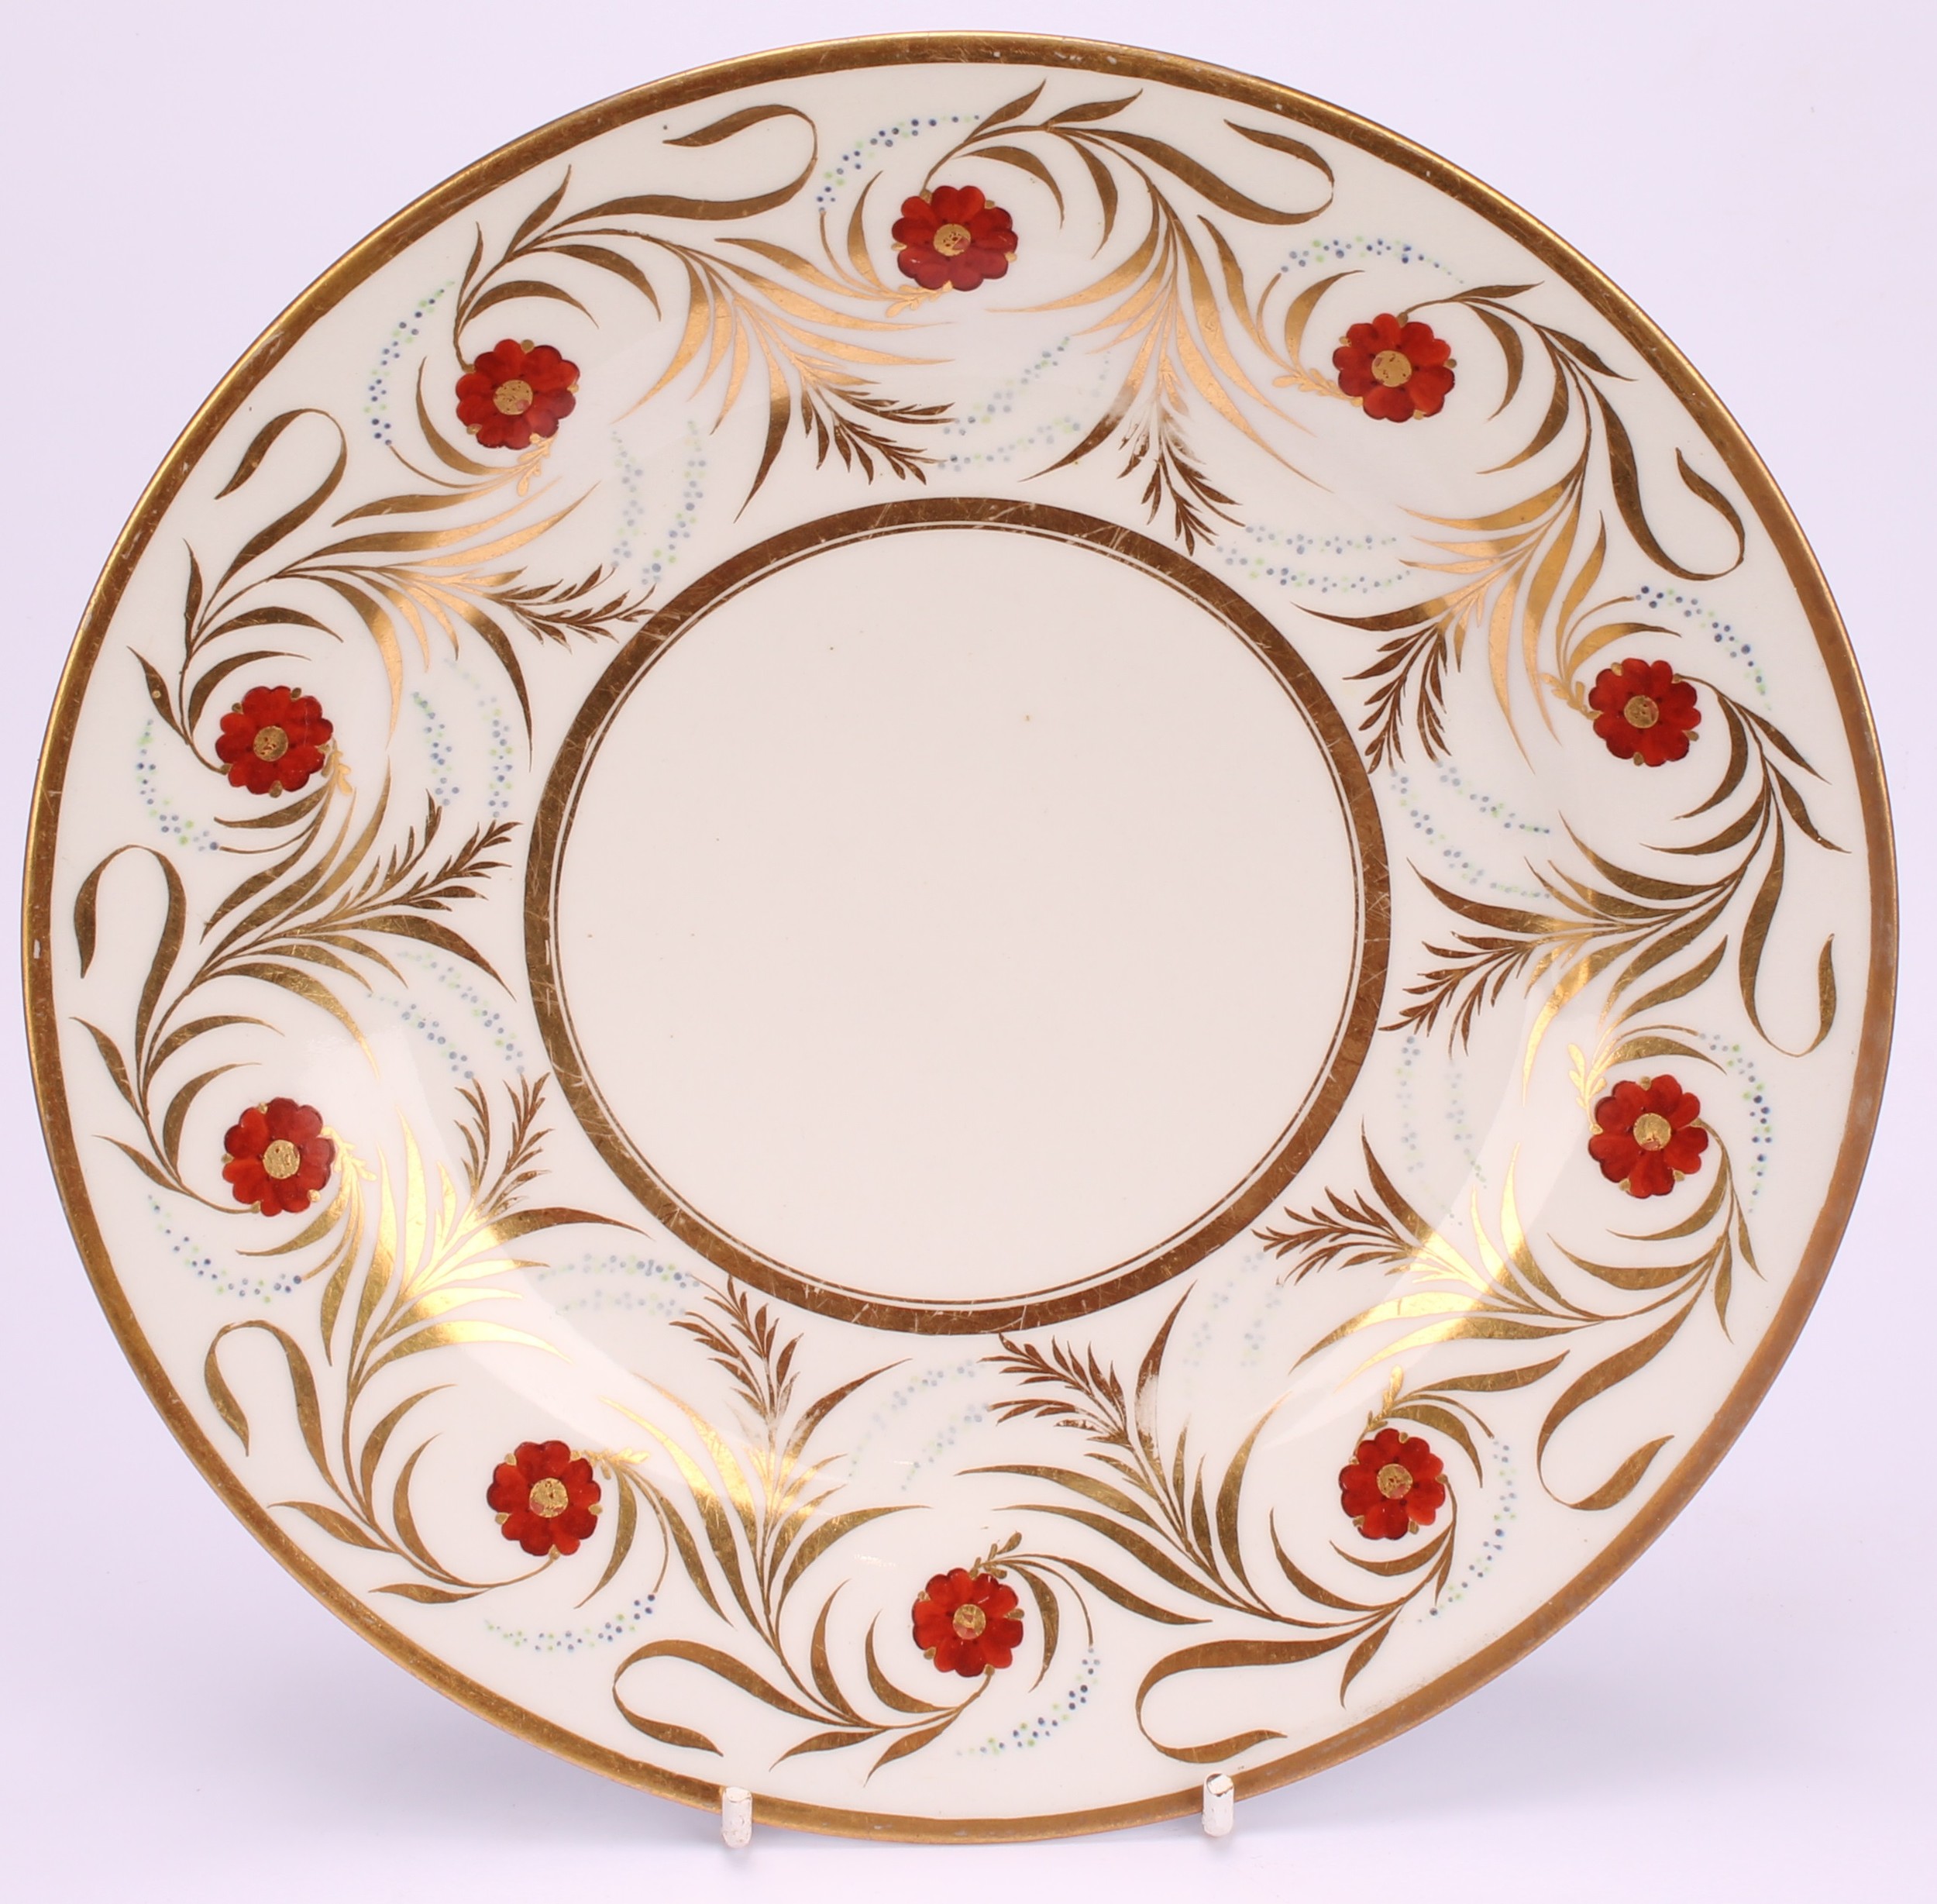 A pair of Worcester Barr Flight and Barr circular plates, painted with red flowers between scrolling - Image 7 of 7